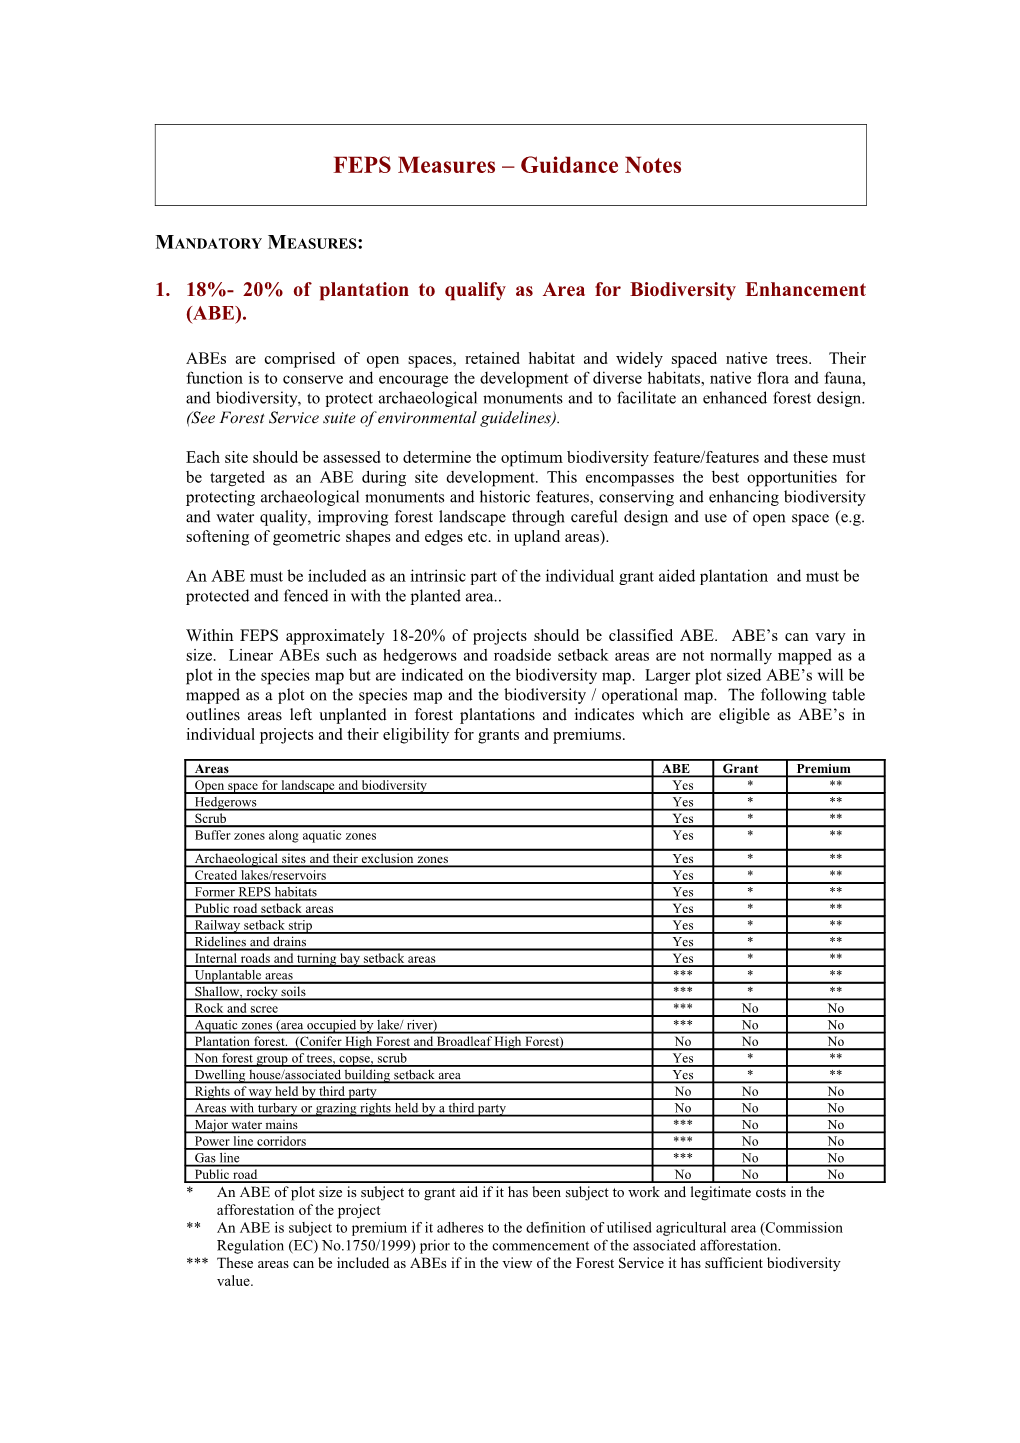 FEPS Measures Guidance Notes